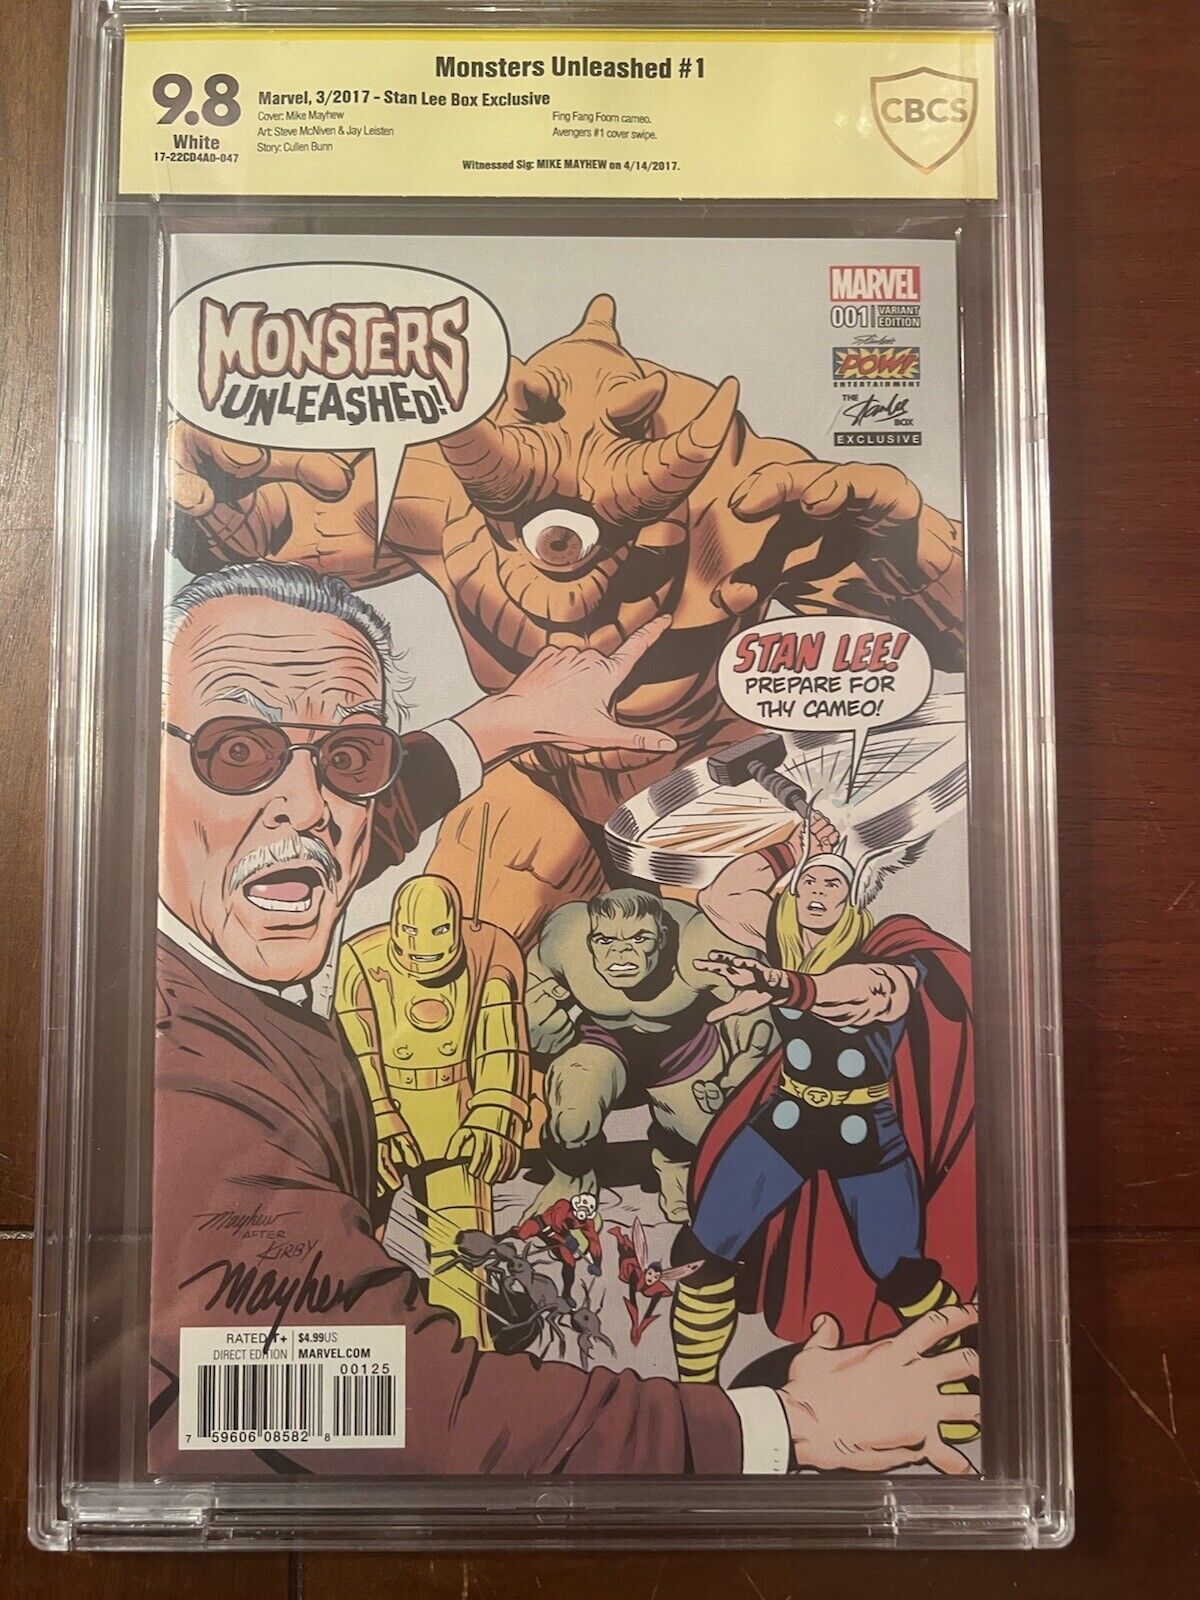 MONSTERS UNLEASHED #1 3/17 STAN LEE BOX VARIANT CBCS 9.8 SS MAYHEW SUPER RARE